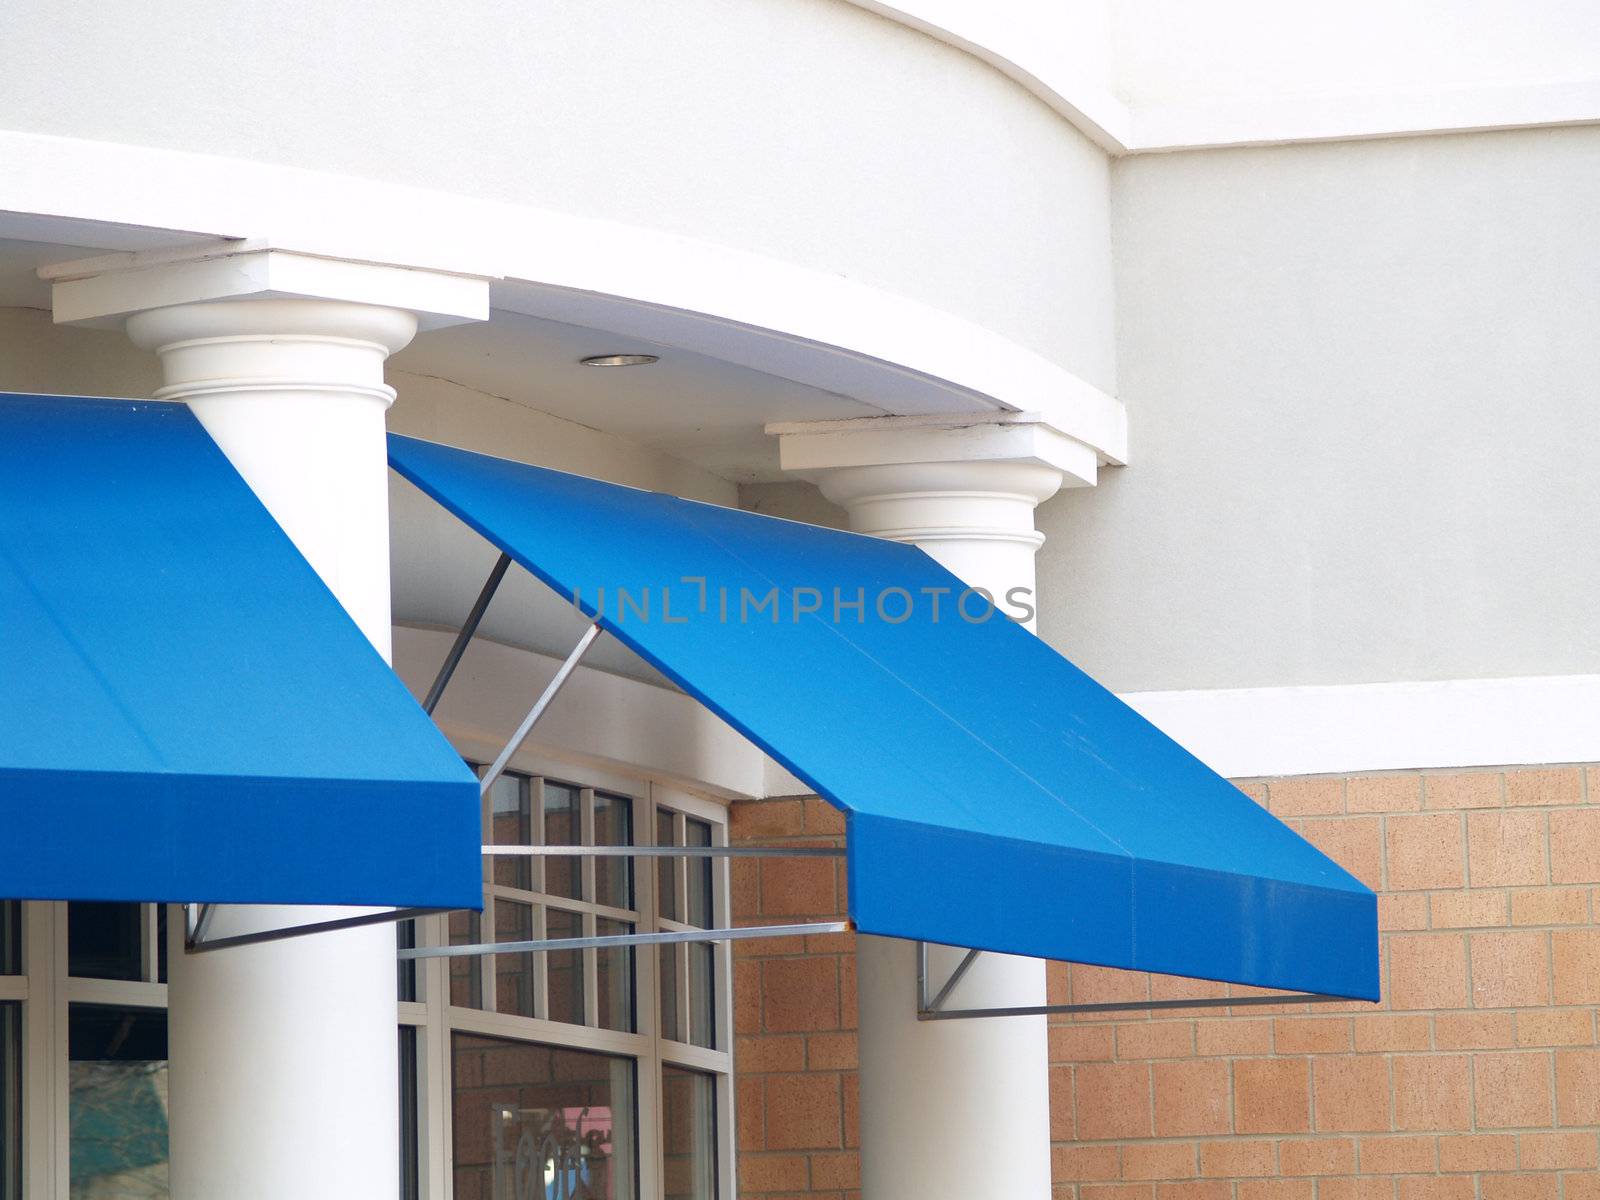 Two blue awnings against a white columned light brick office building